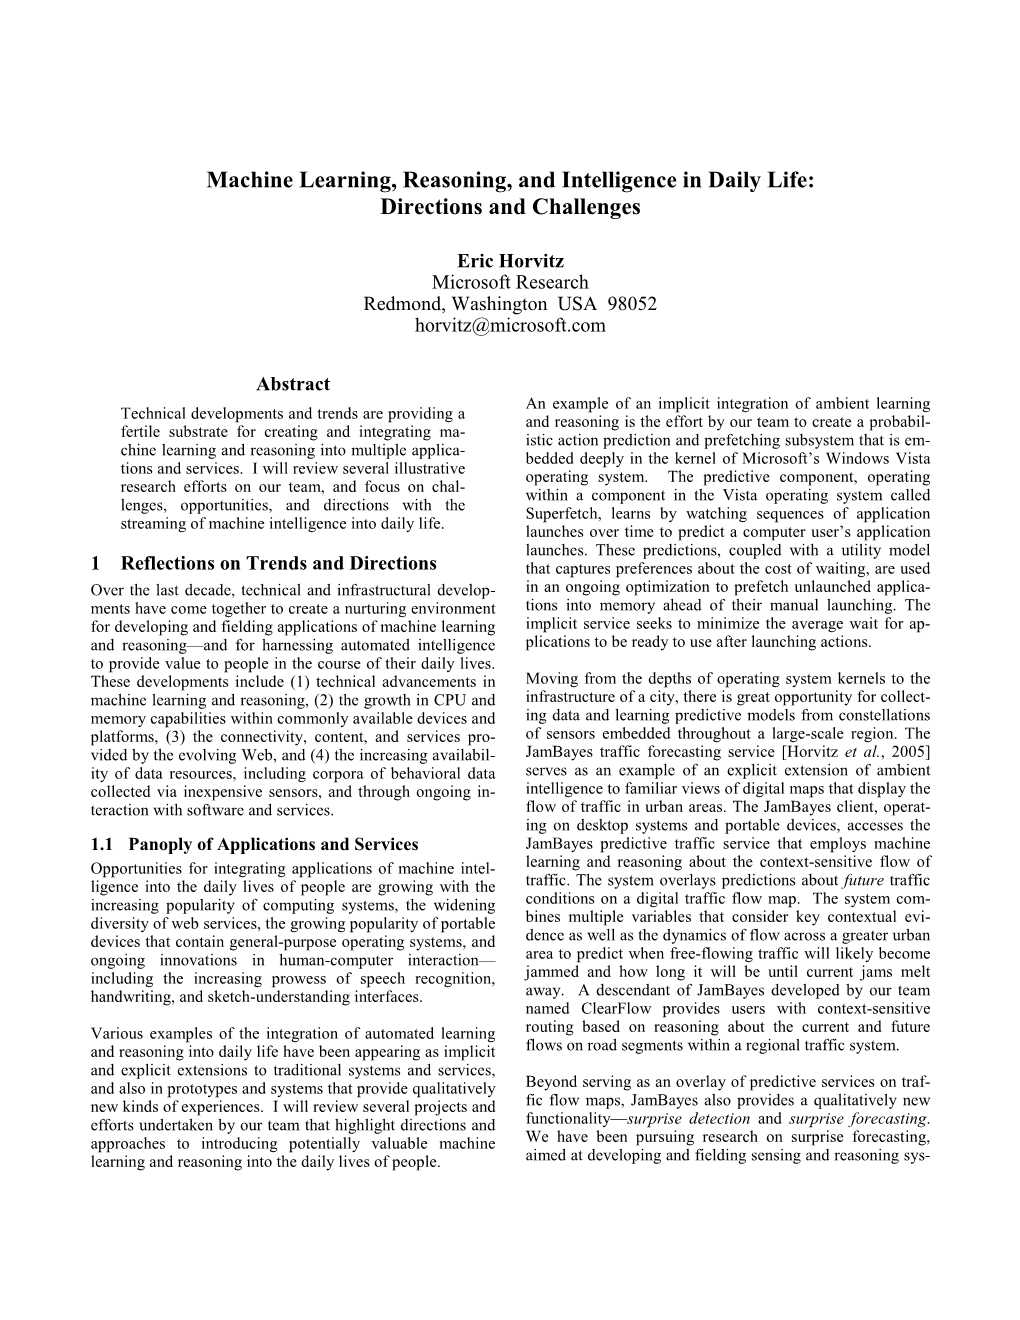 Machine Learning, Reasoning, and Intelligence in Daily Life: Directions and Challenges